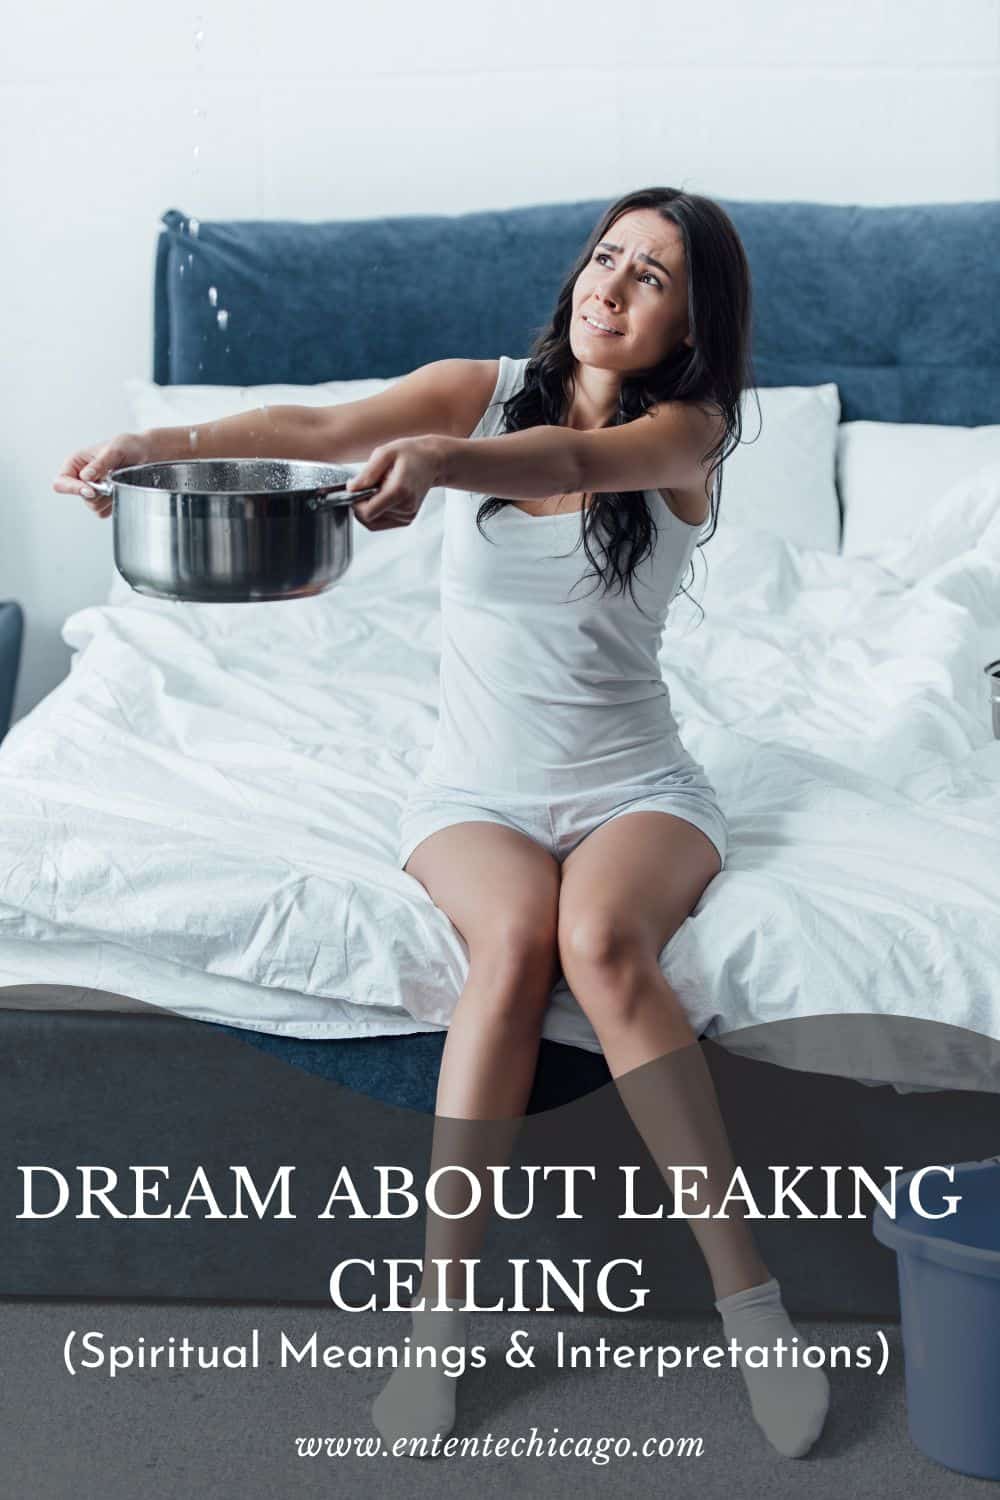 What Does It Mean When You dream about leaking ceiling